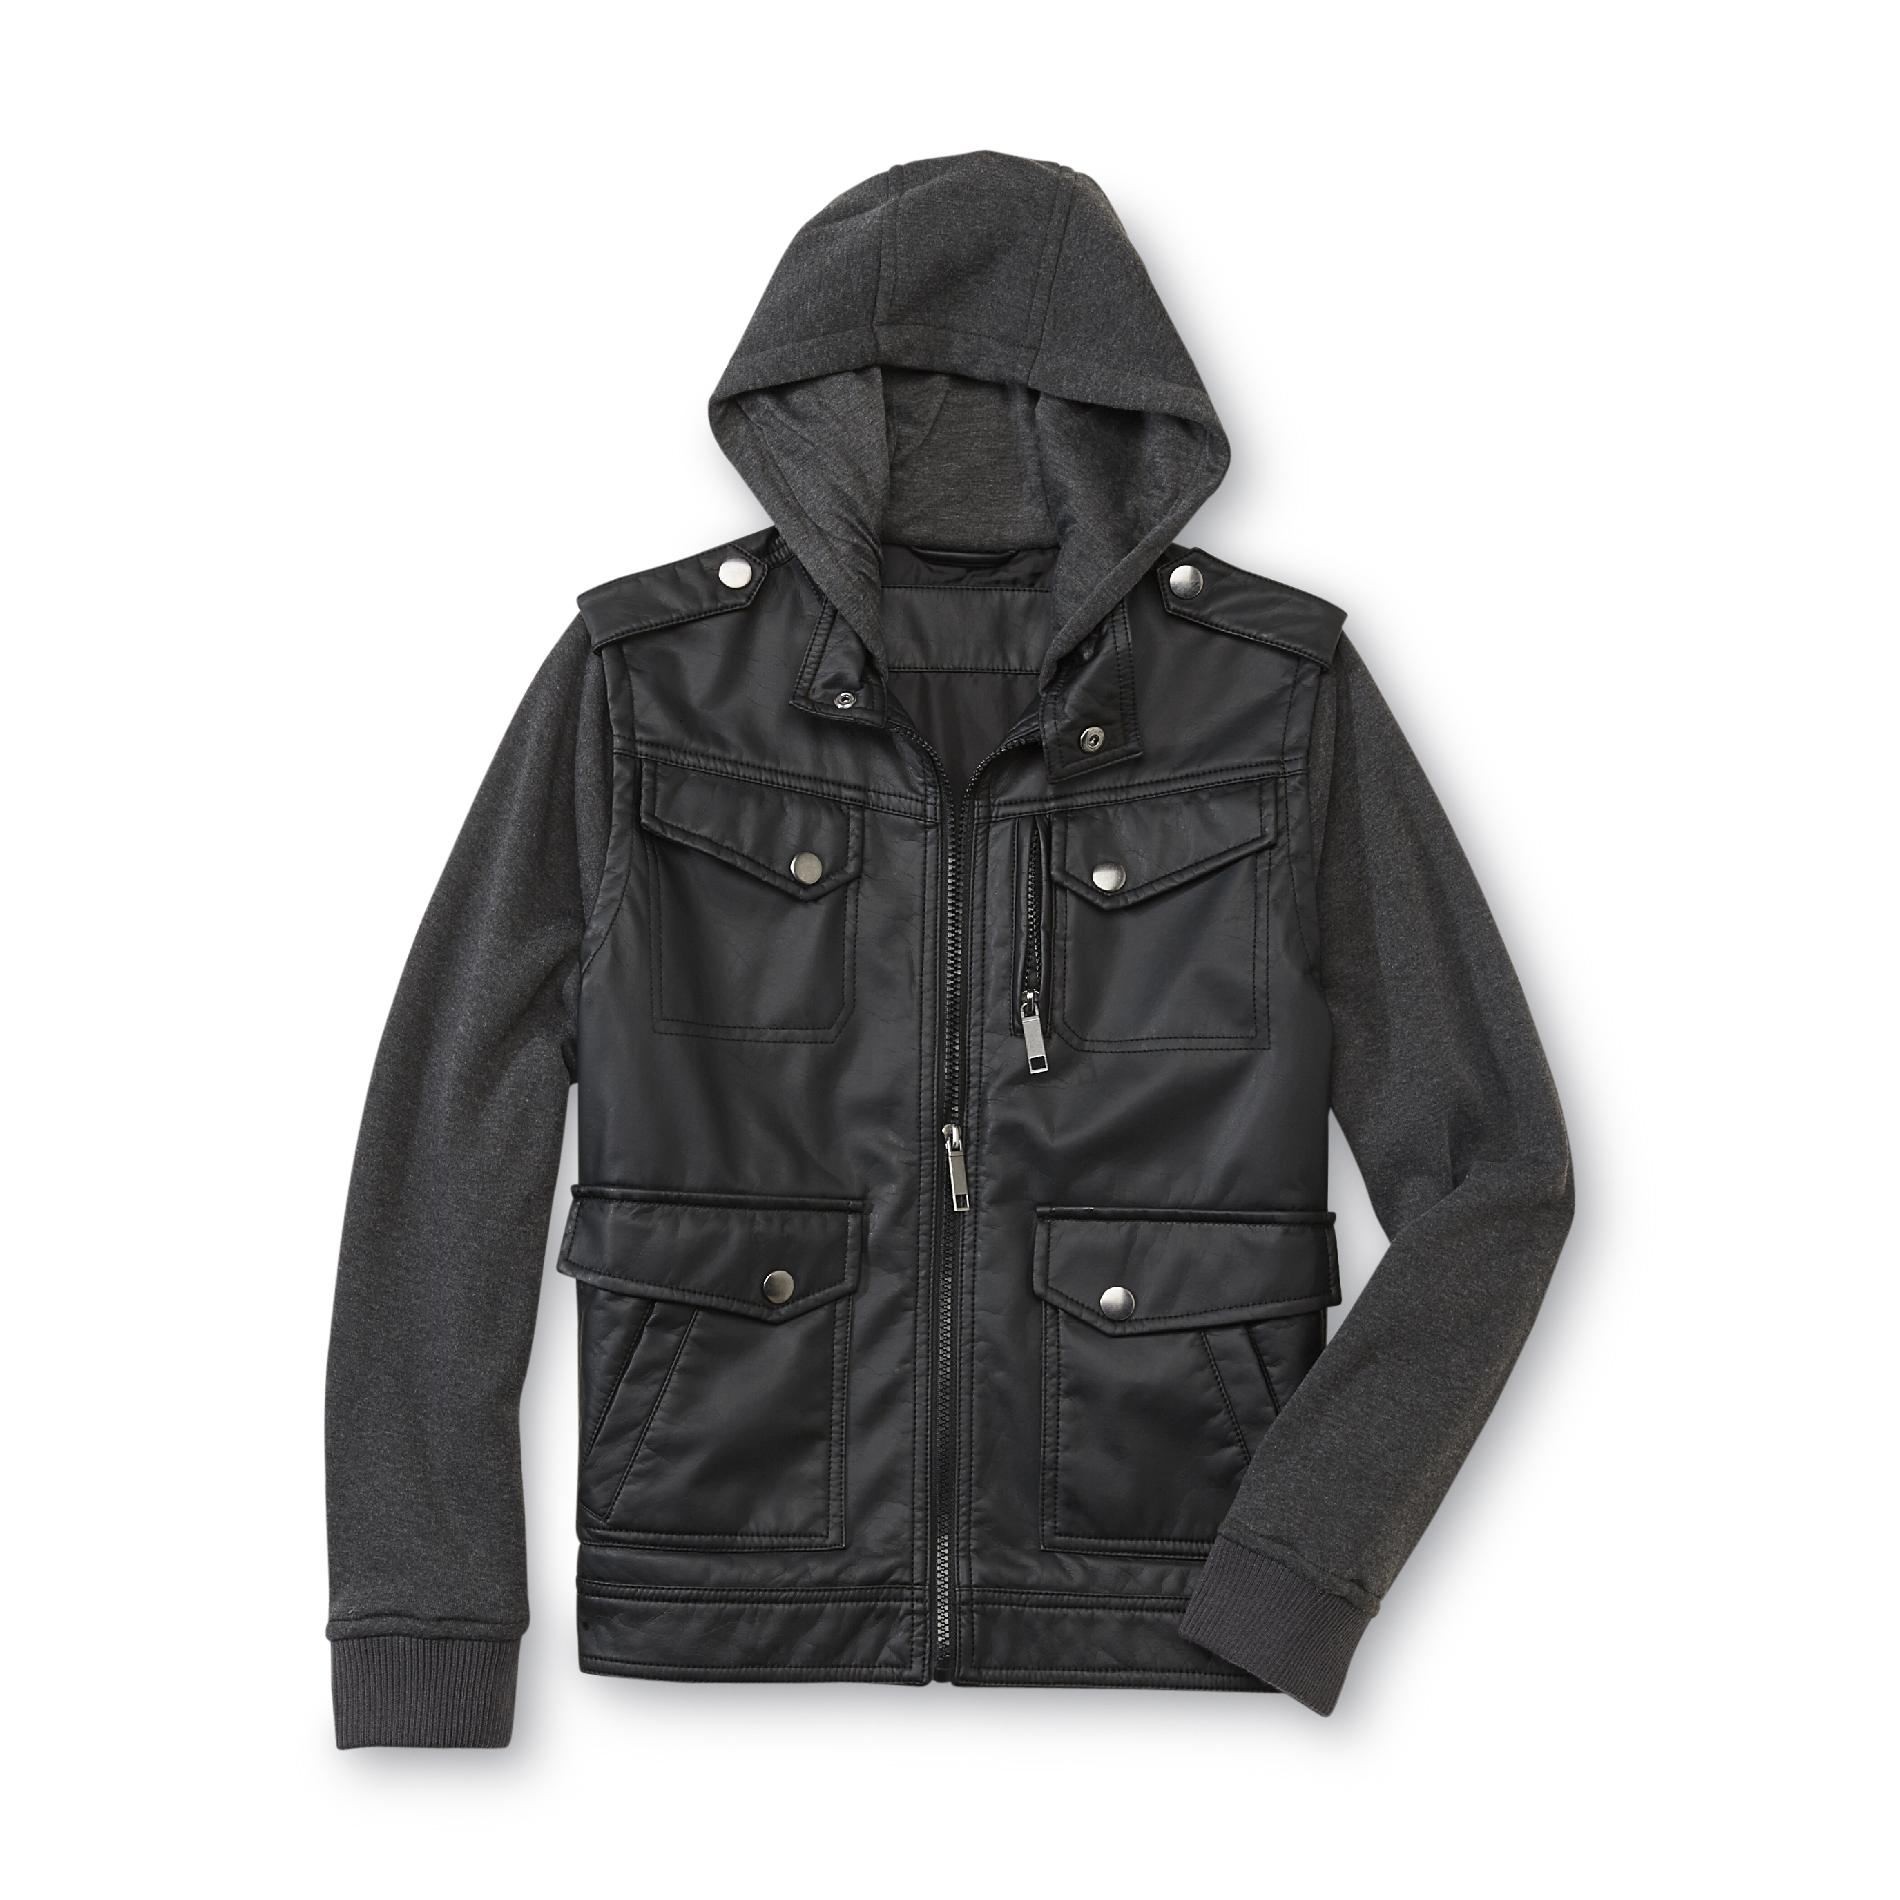 Route 66 Boy's Hooded Layer-Look Bomber Jacket